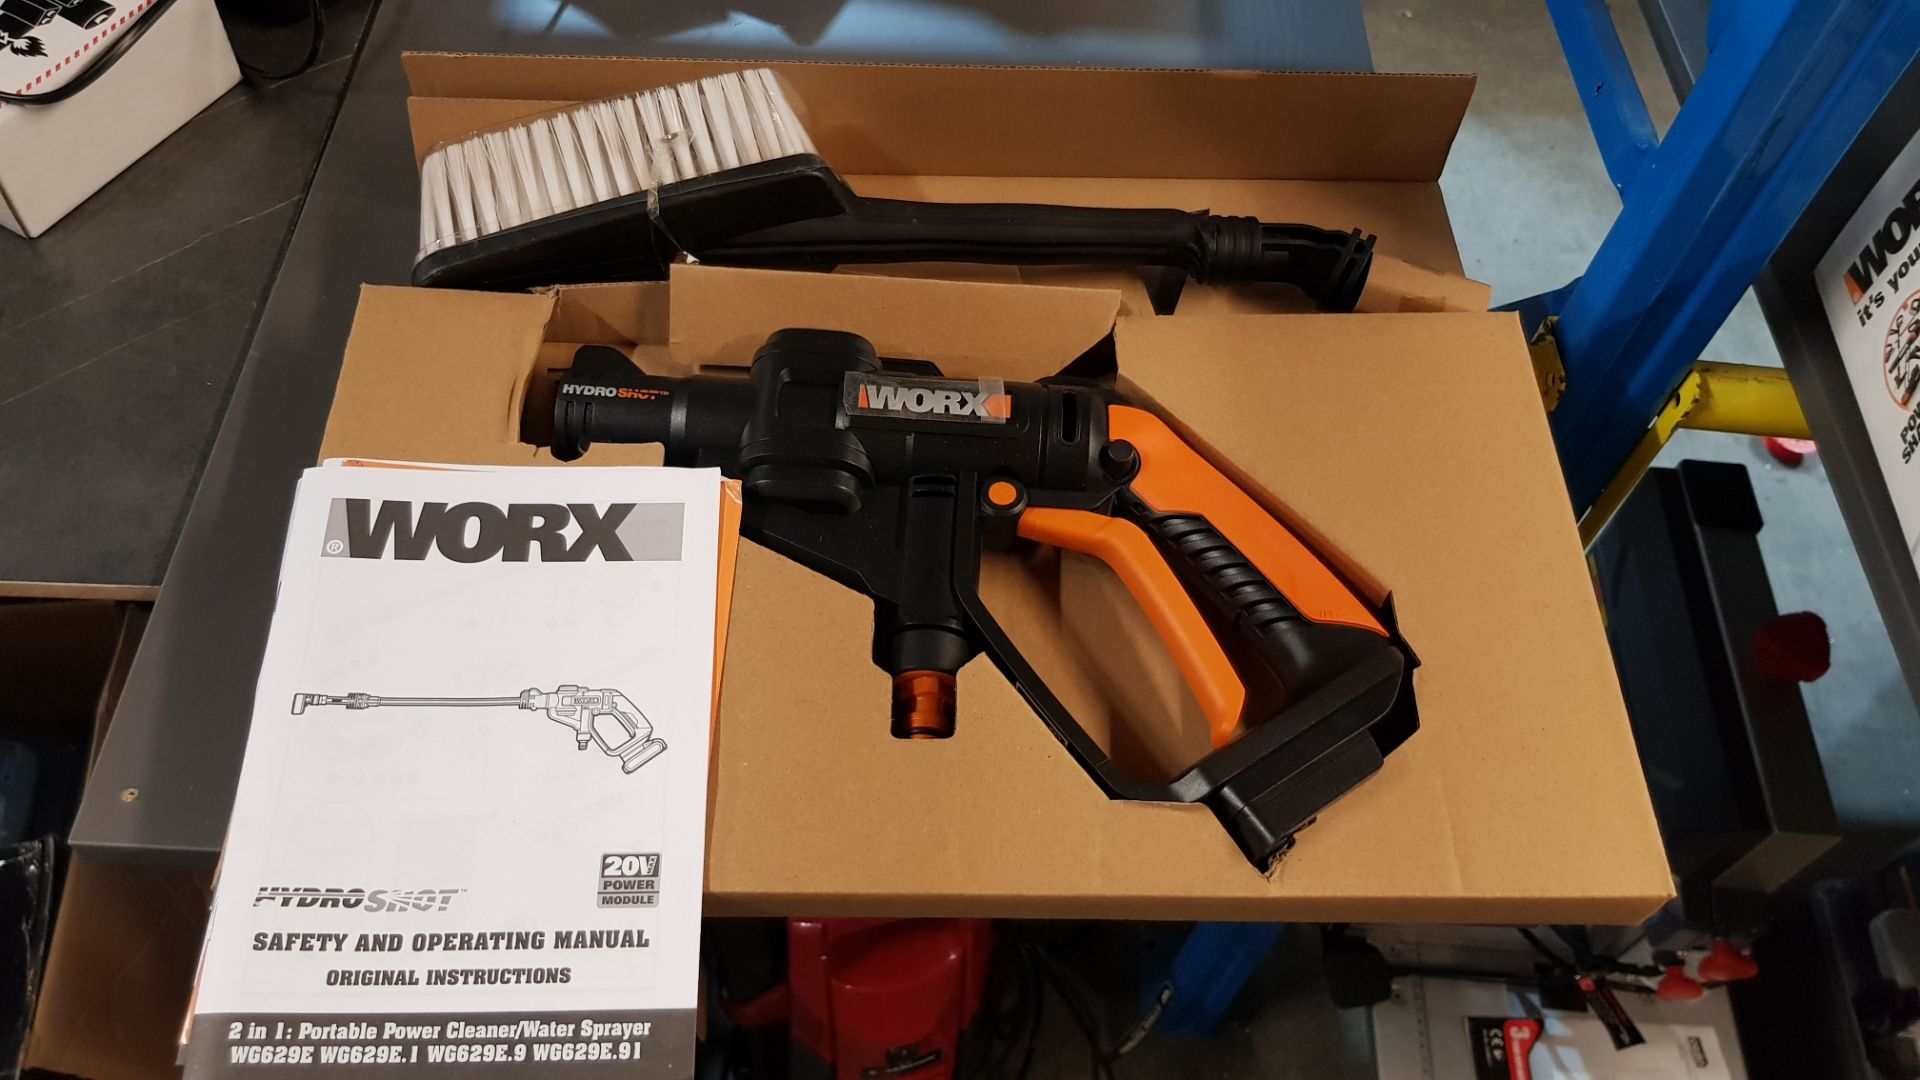 (R15F) 1x Worx Hydro Shot 20V 2 In 1 Portable Power Cleaner / Water Spray RRP £119. Item Appears A - Image 4 of 6